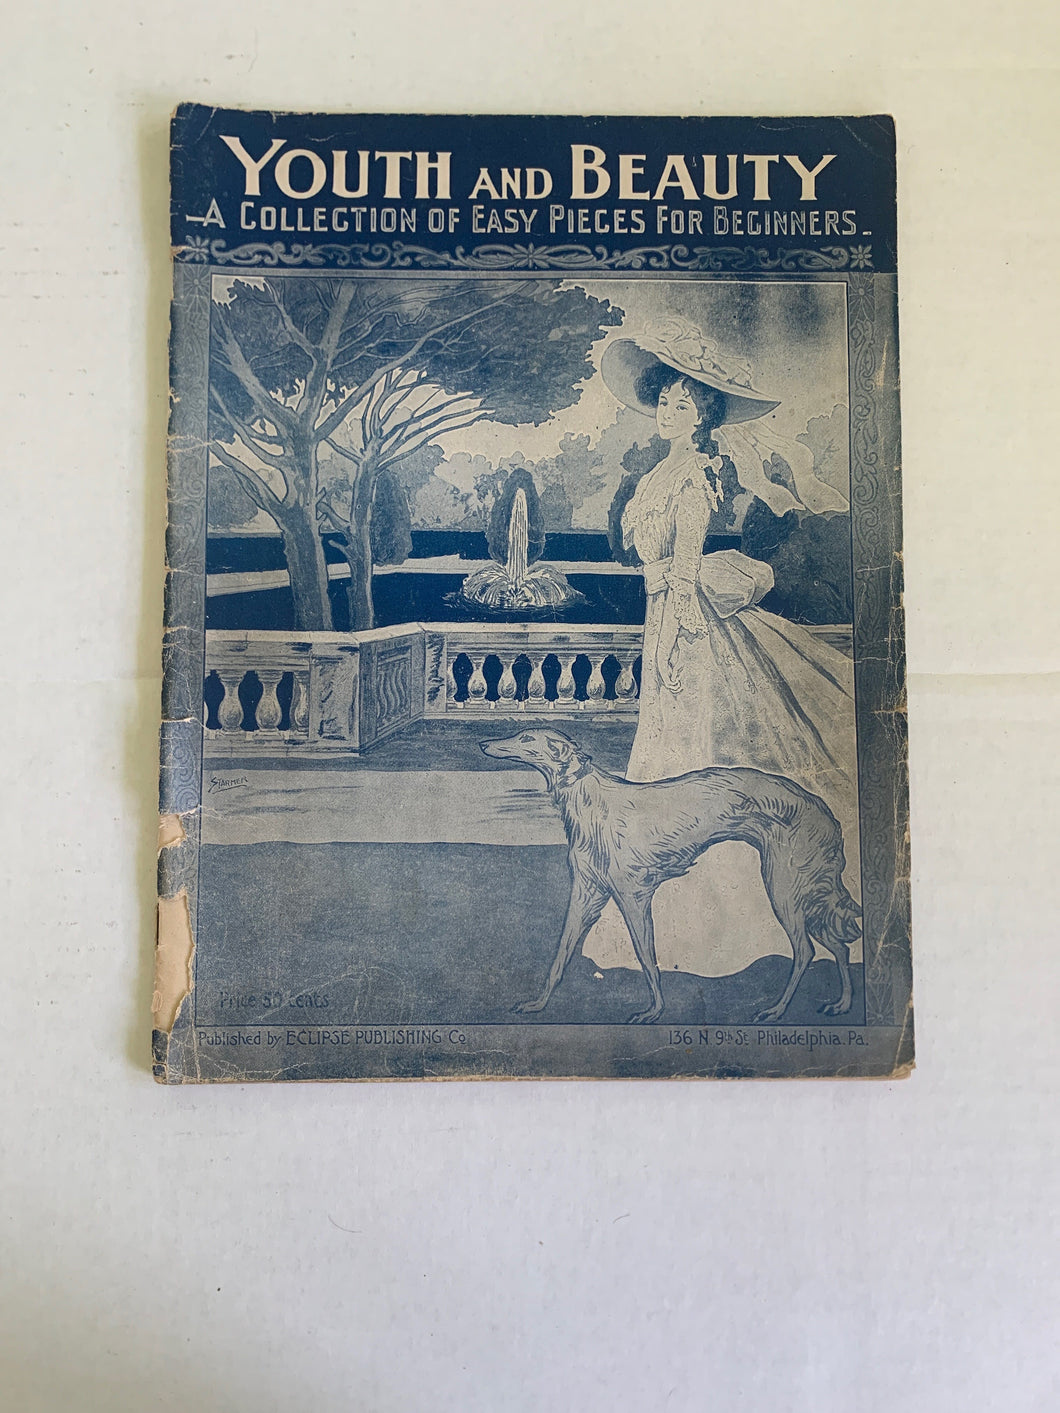 Antique 1910s Sheet Music “Youth and Beauty” Collection of Easy Pieces for Beginners